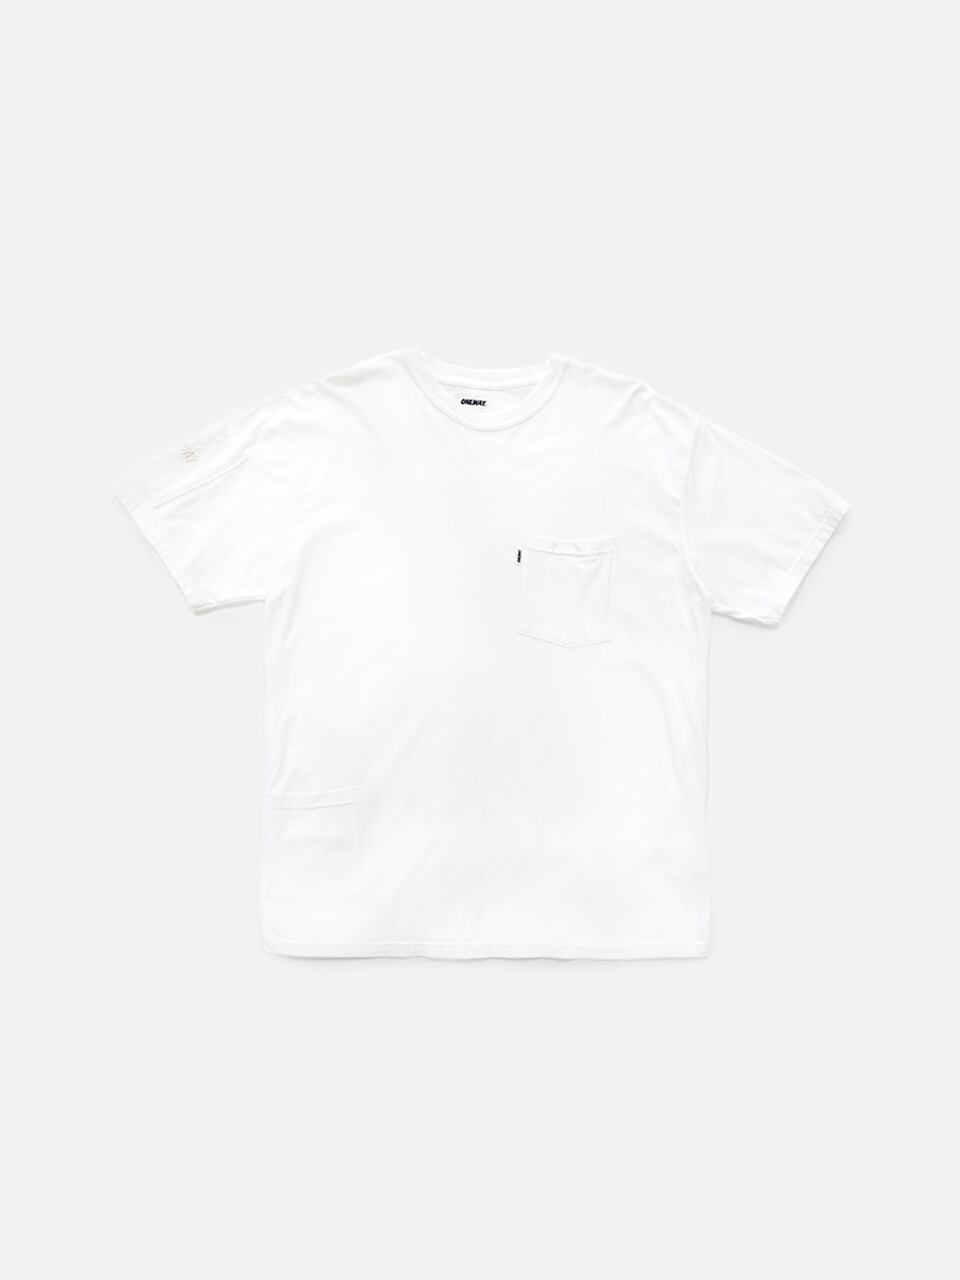 3POCKET S/STEE / FADE WHITE